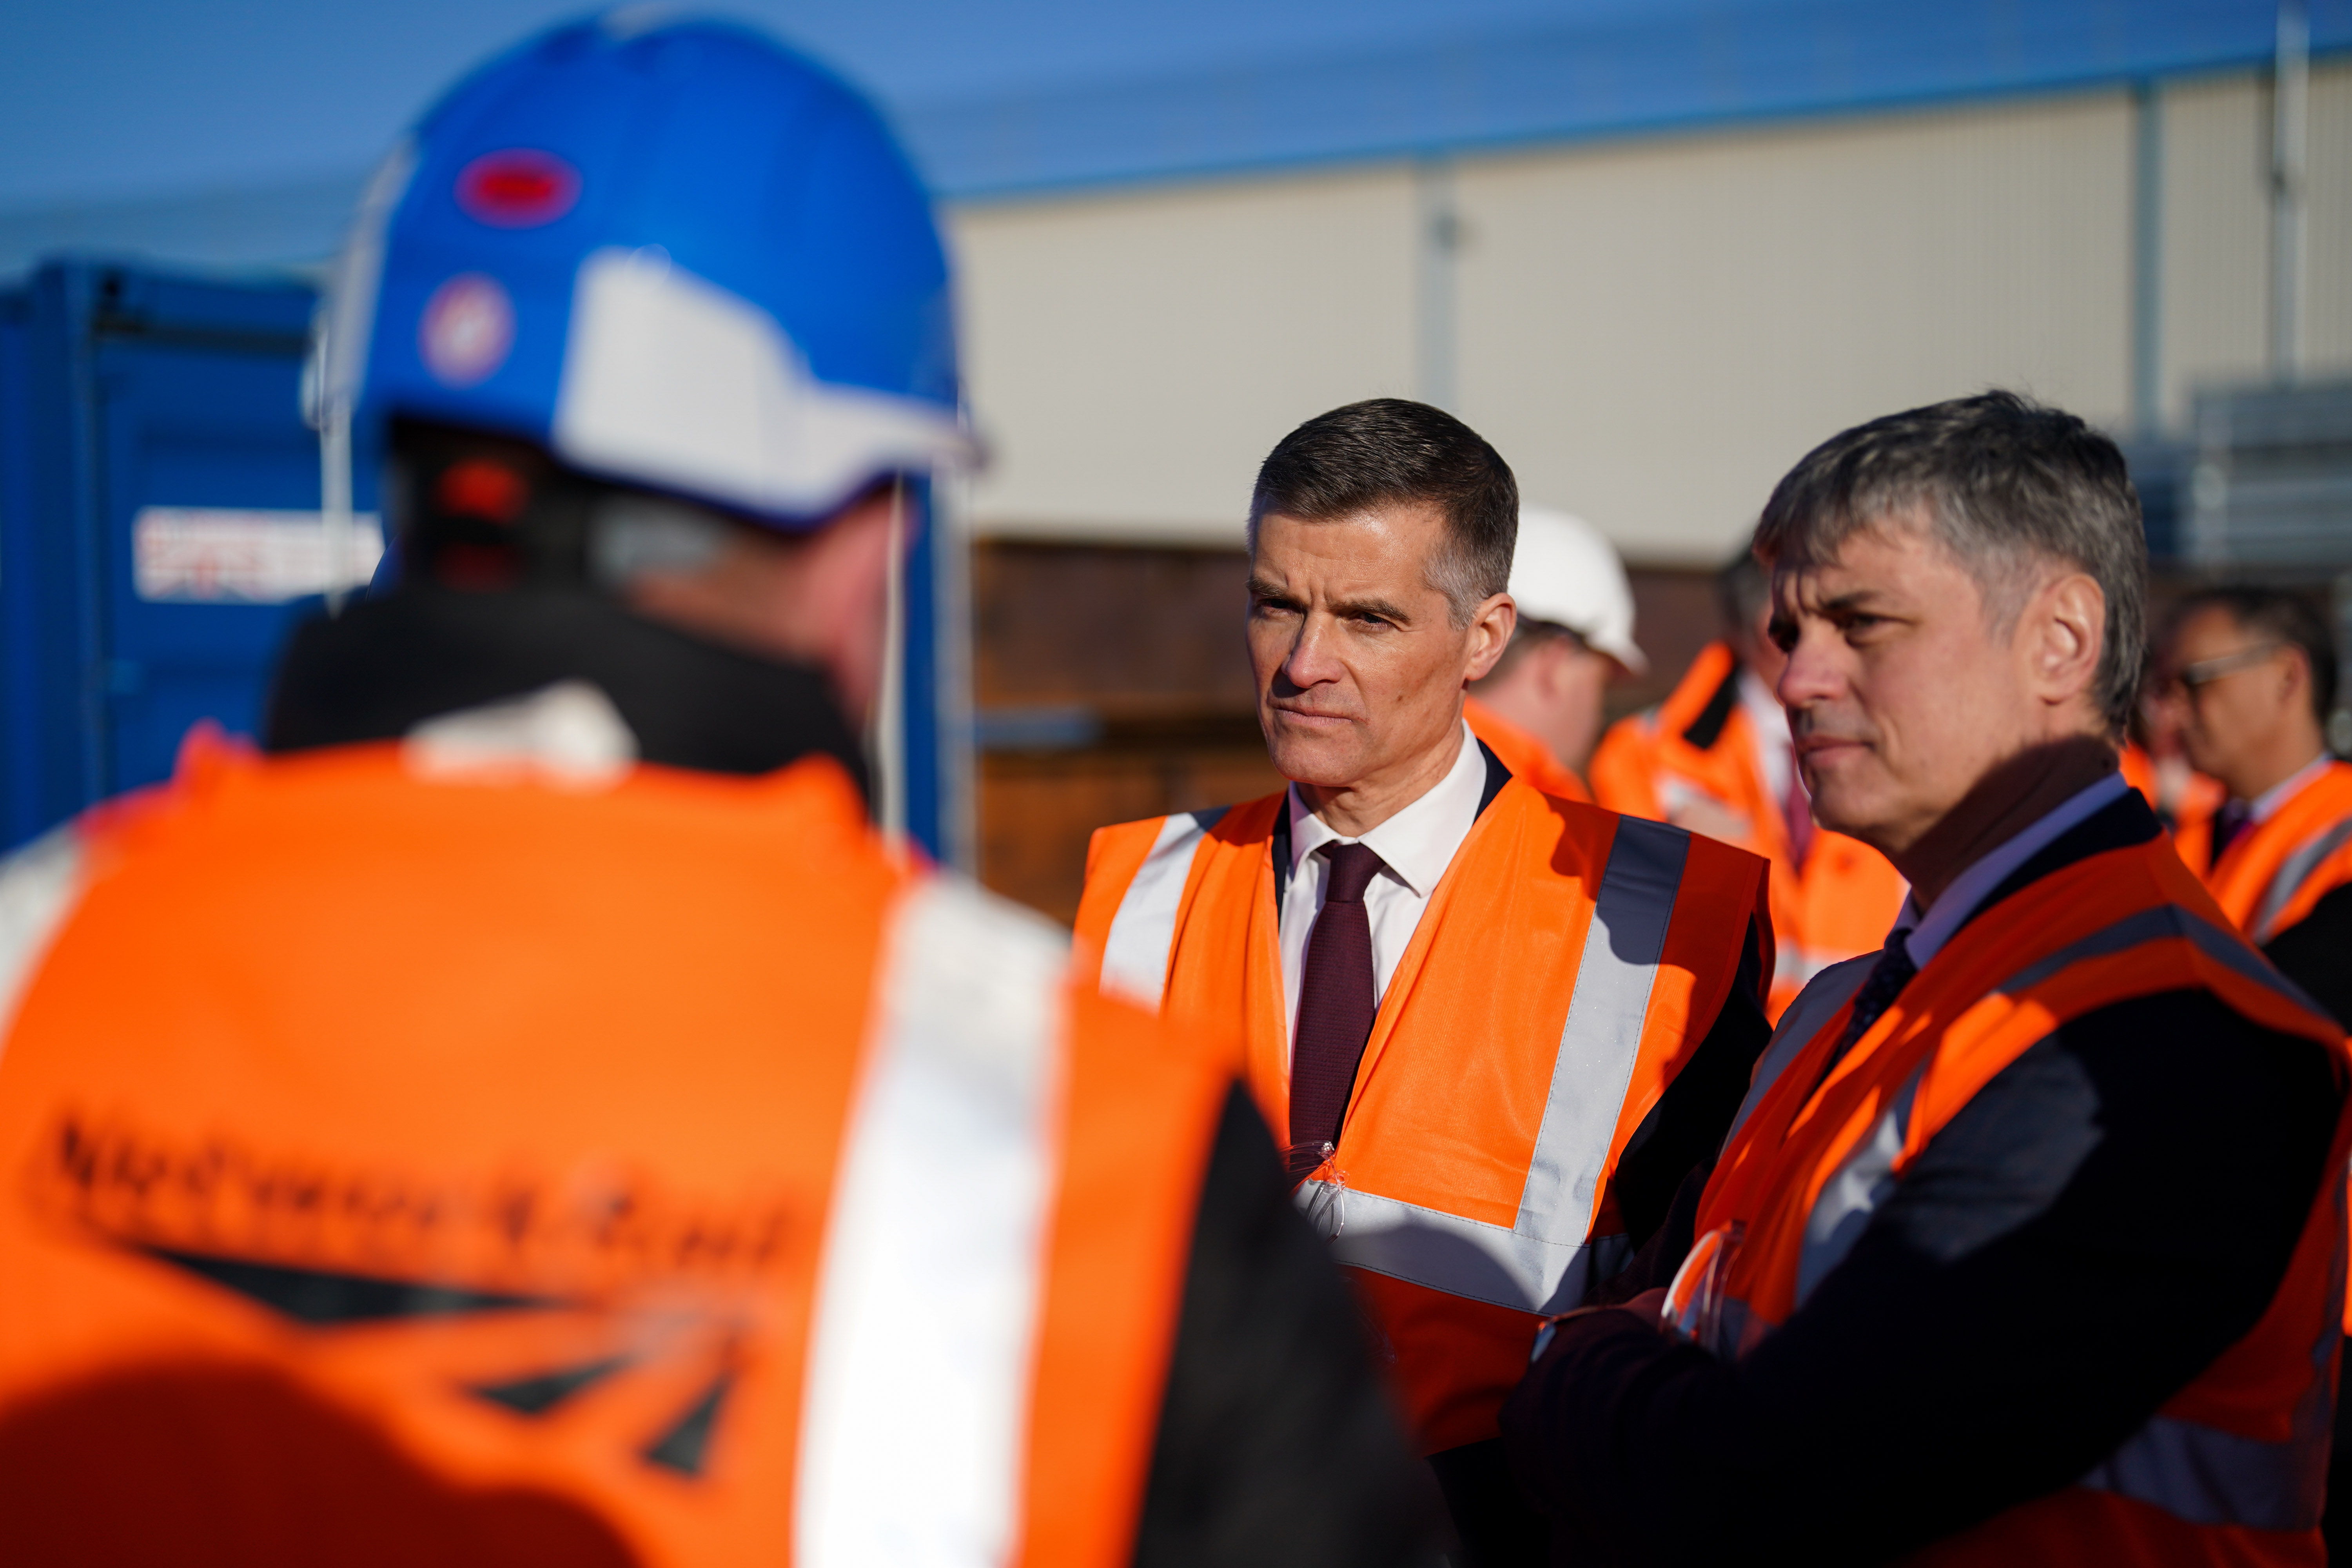 DO NOT PUBLISH BEFORE EMBARGOED 00.01 FEB 21  Transport Secretary Mark Harper (centre) and Ukraine Ambassador to the UK  Vadym Prystaiko talk to a Ukrainian engineer during a visit to Mabey Bridge HQ engineering firm in Gloucester where they received training. (Jacob King/PA Wire)